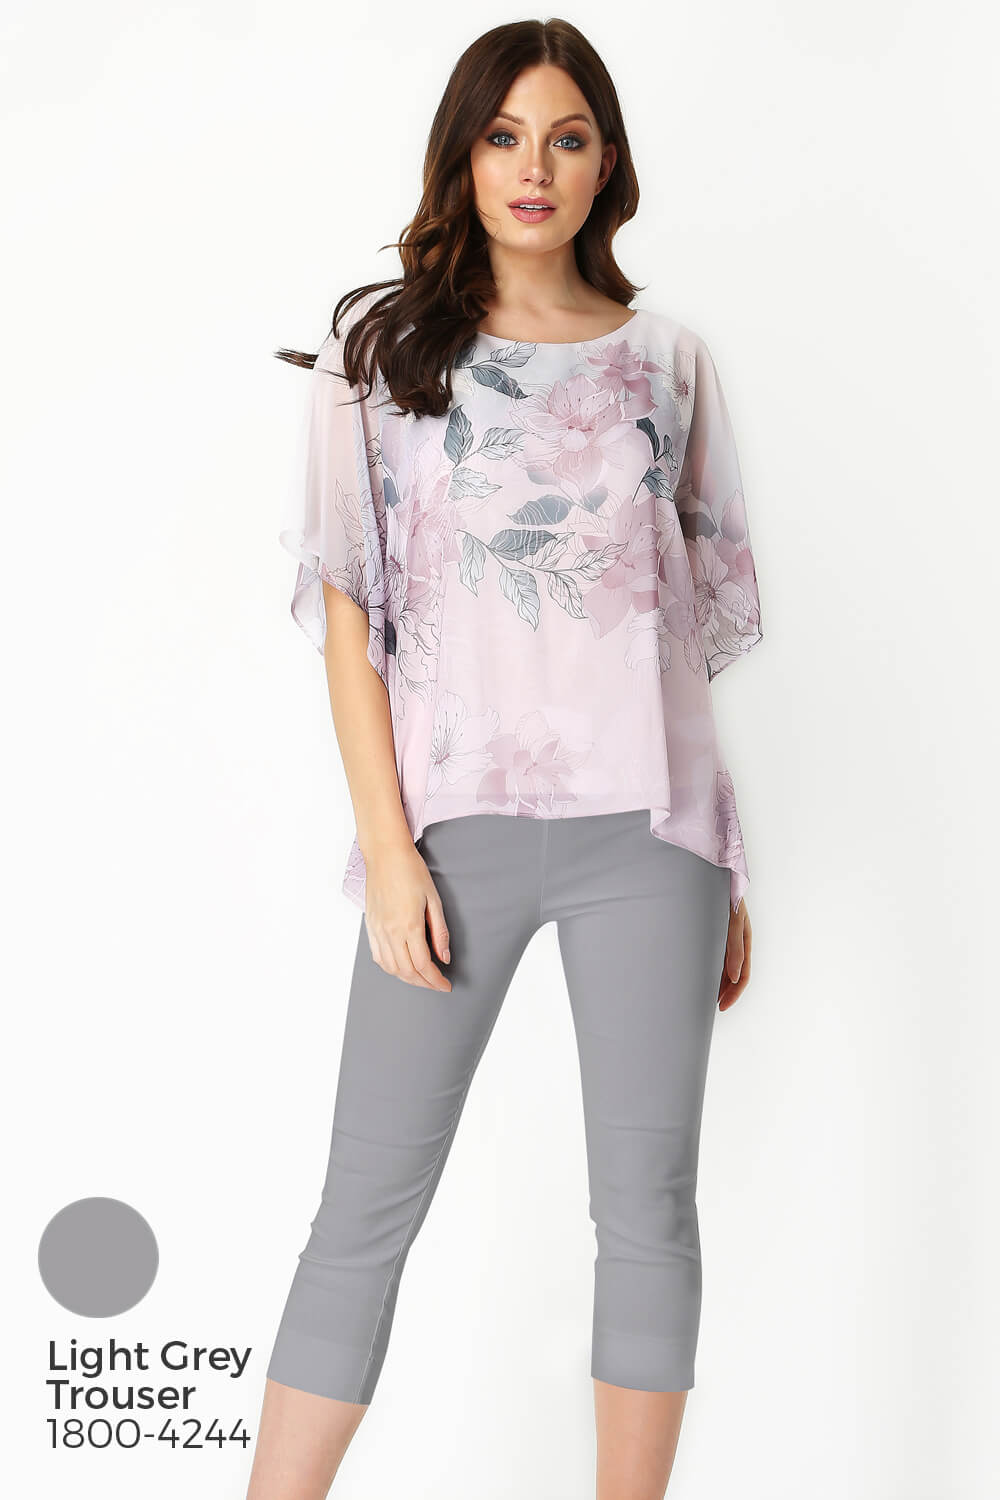 PINK Floral Chiffon Overlay Top, Image 6 of 8